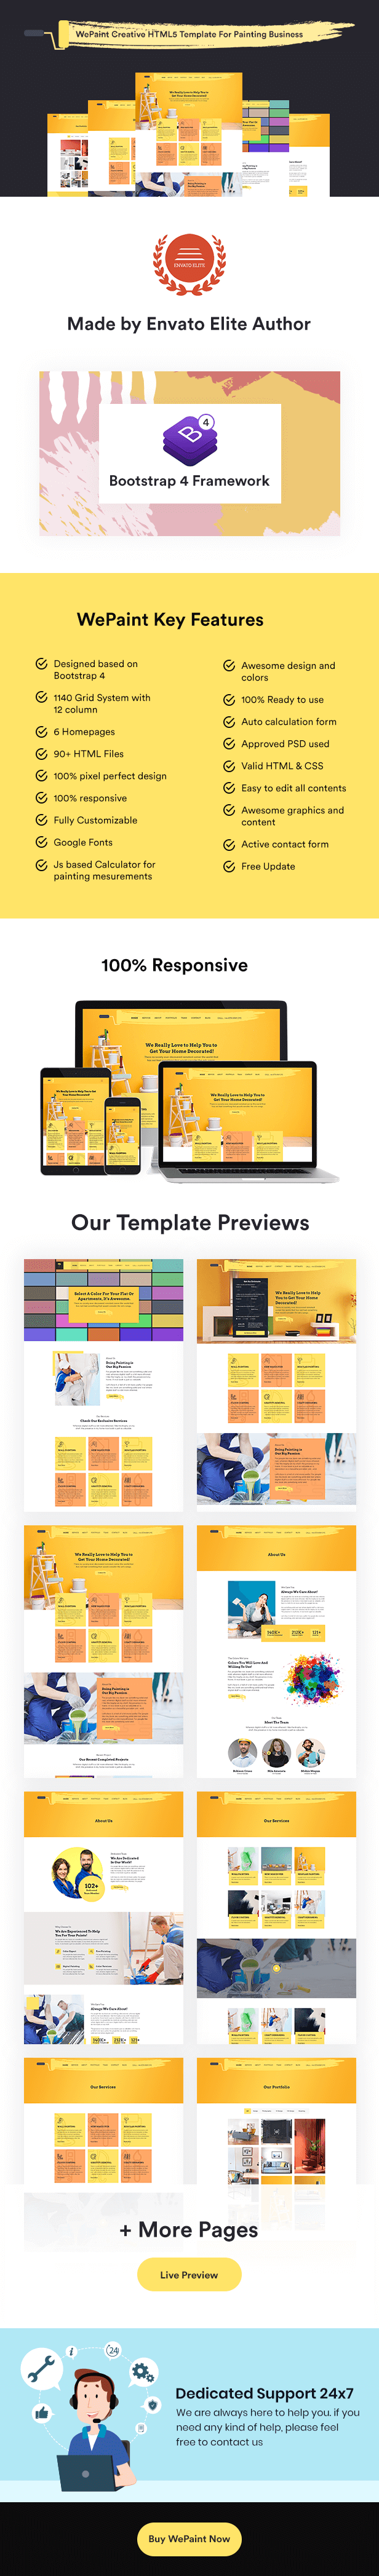 WePaint - Creative HTML5 Template For Painting Business - 5